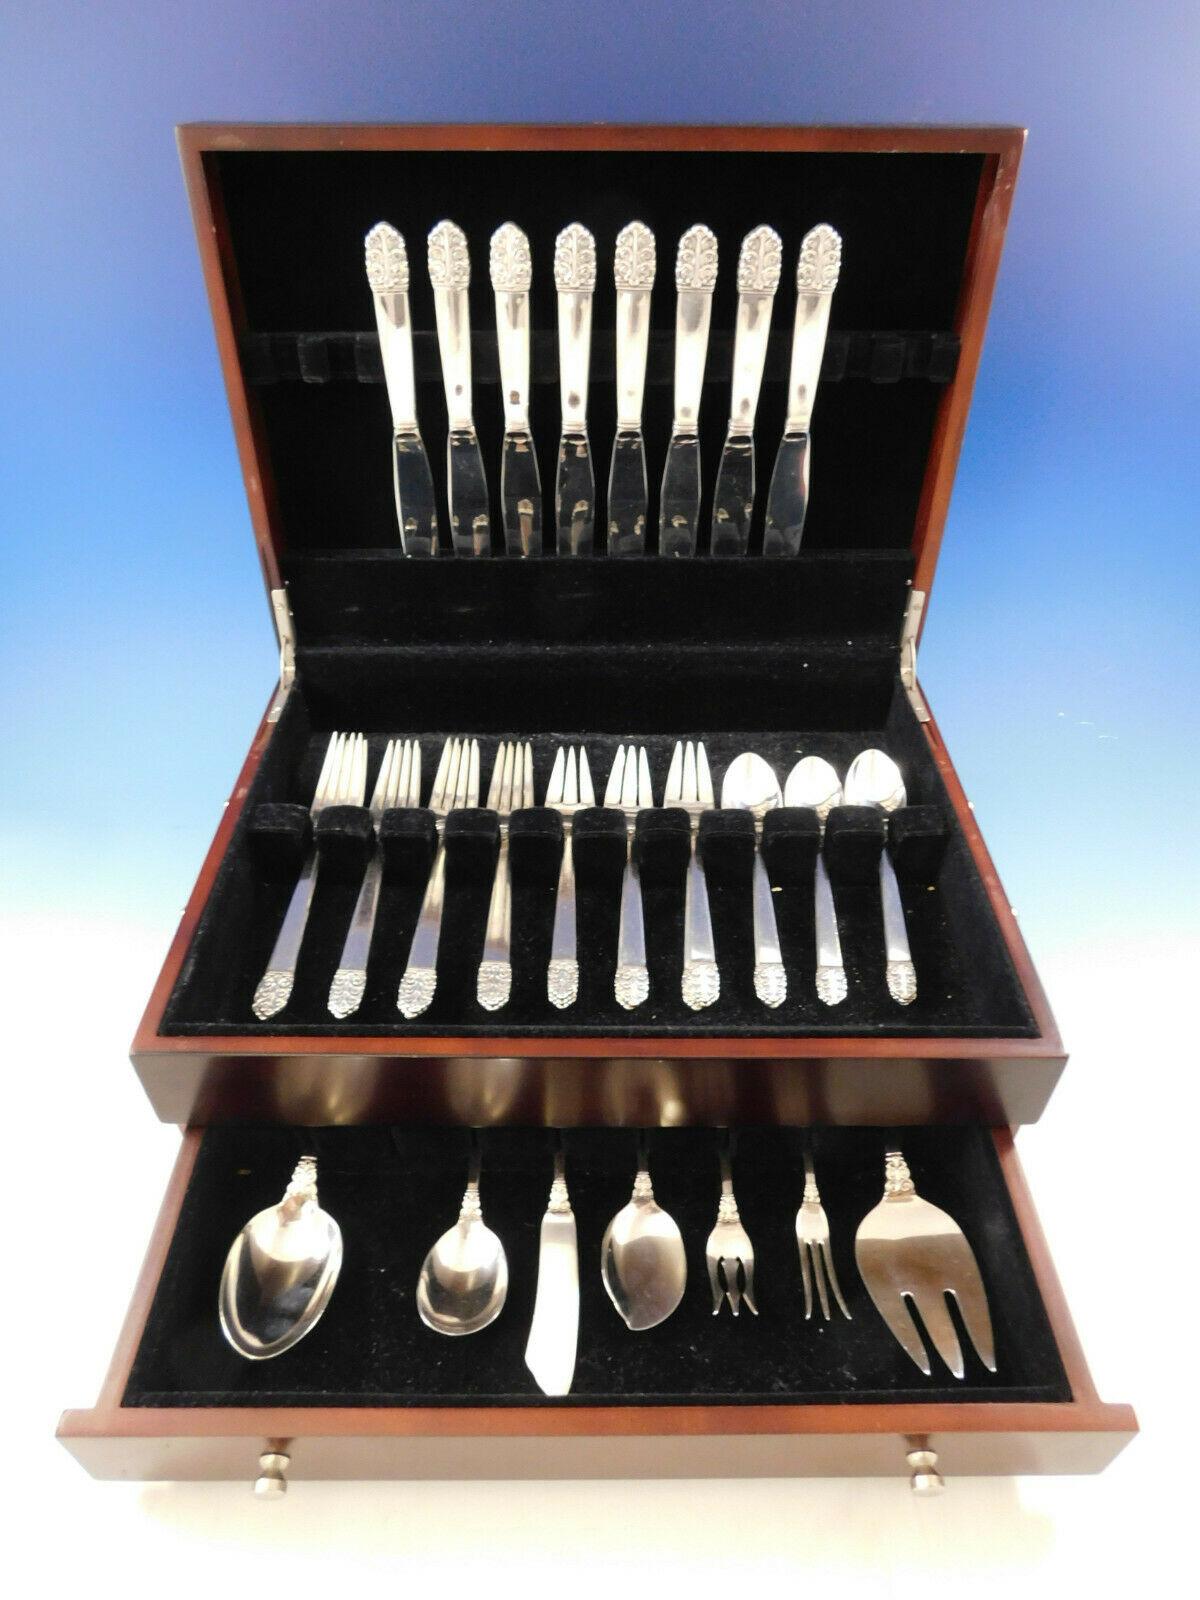 Mid-Century Modern northern lights by International glossy Sterling silver flatware set, 48 pieces. This set includes:

8 knives, 8 7/8